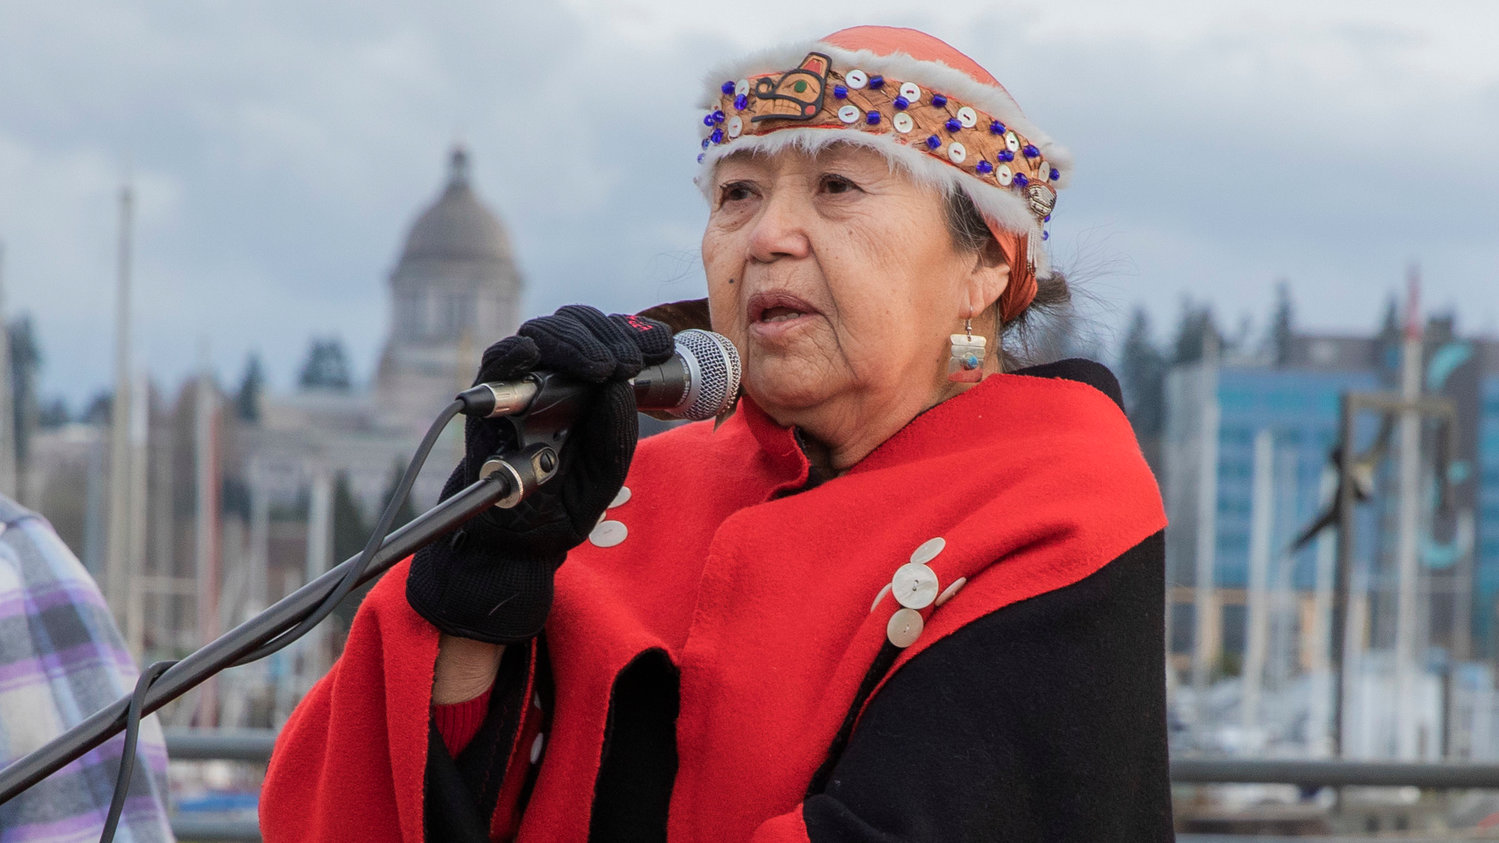 Mary Leitka, a Hoh Tribal member who works for Nisqually Emergency Management, speaks to attendees during a prayer journey to protect Oak Flat, a land that is sacred to the San Carlos Apache Tribe, at an event hosted by Interfaith Works of Thurston County on Wednesday in Olympia.